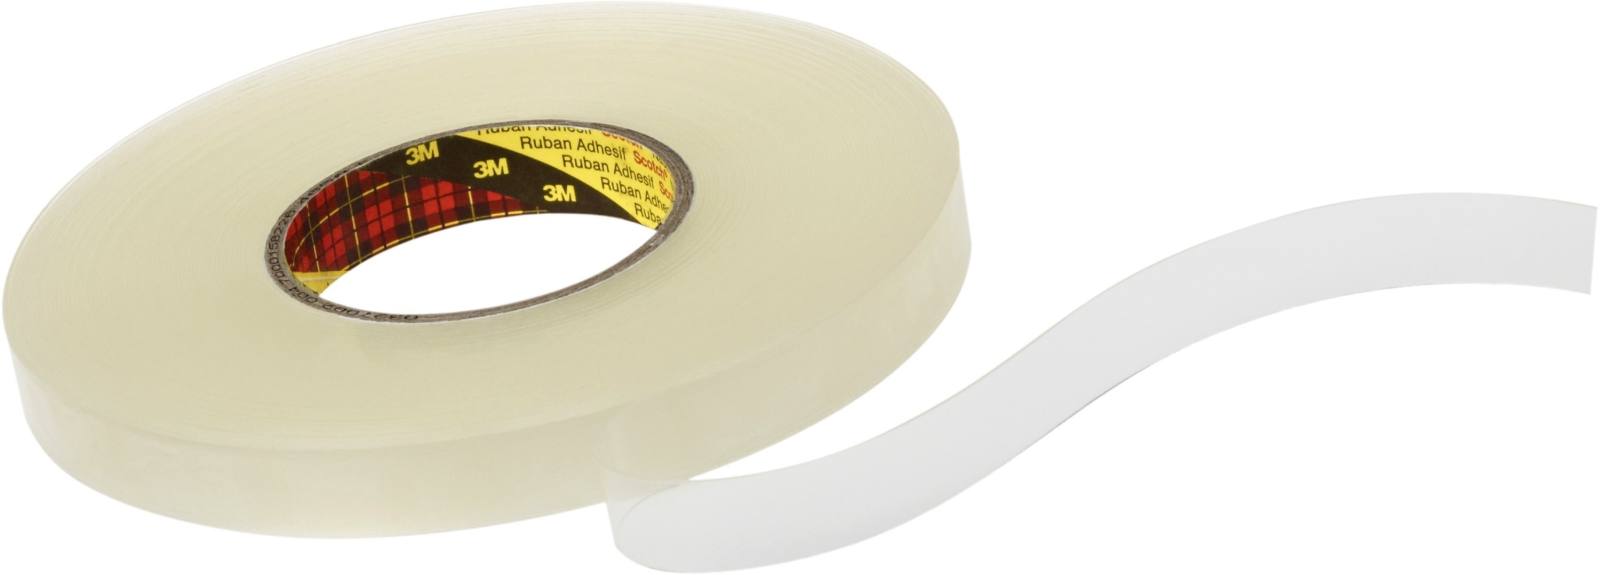 3M Double-sided removable adhesive tape 4658F, transparent, 6 mm x 25 m, 0.8 mm